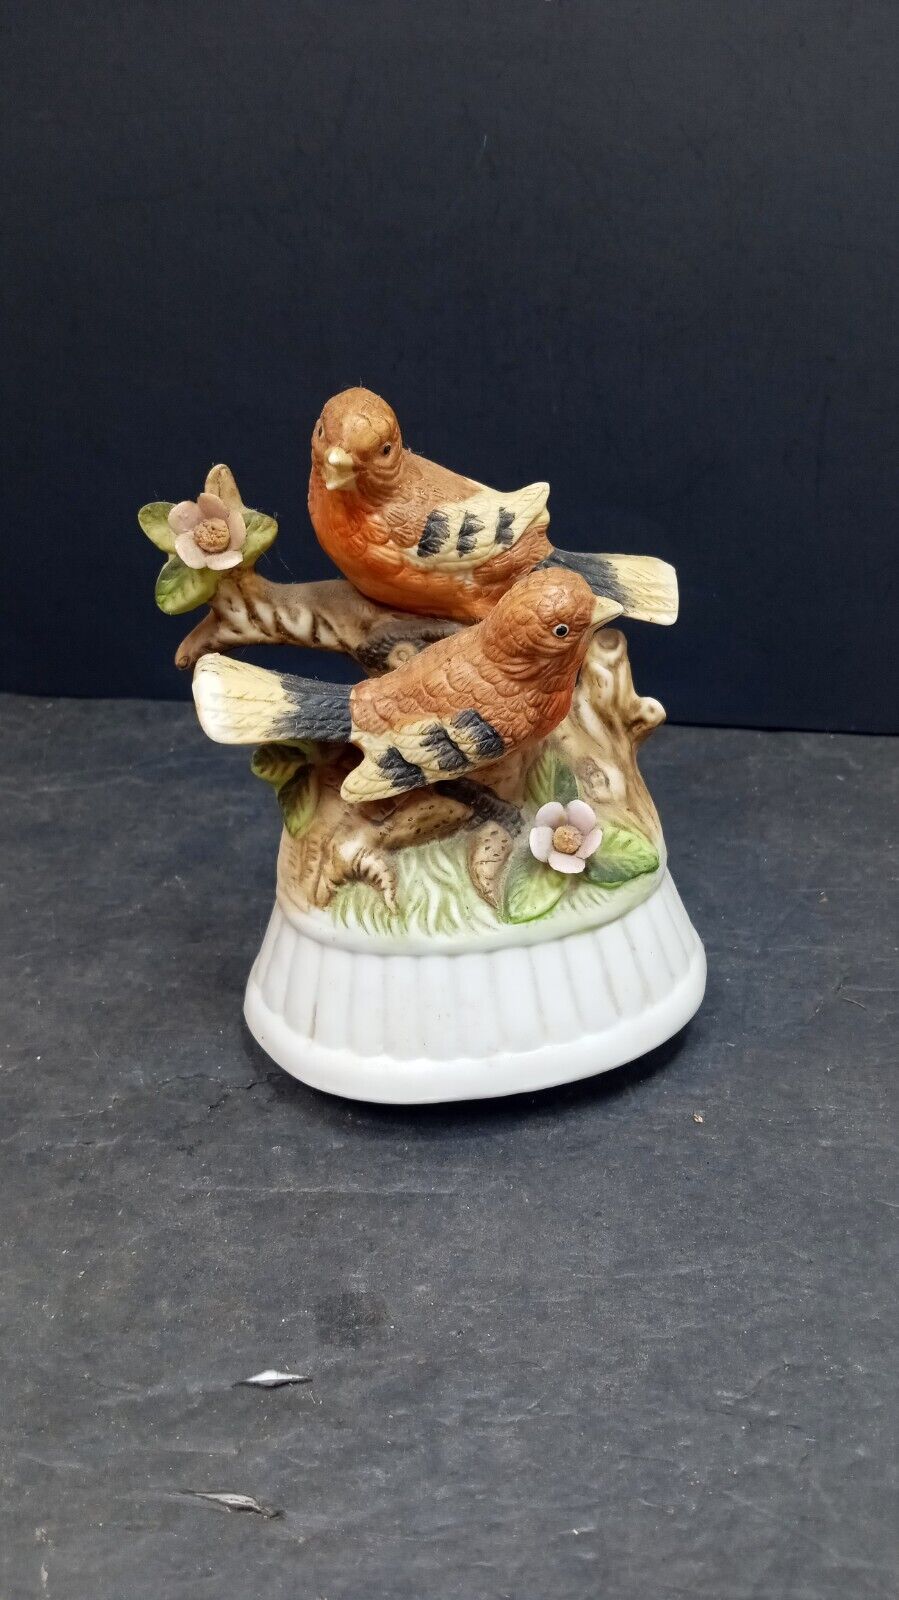 ❤️ Vintage Ceramic Birds Wind Up Music Plays Beautifully -Not Sure Of The Song 